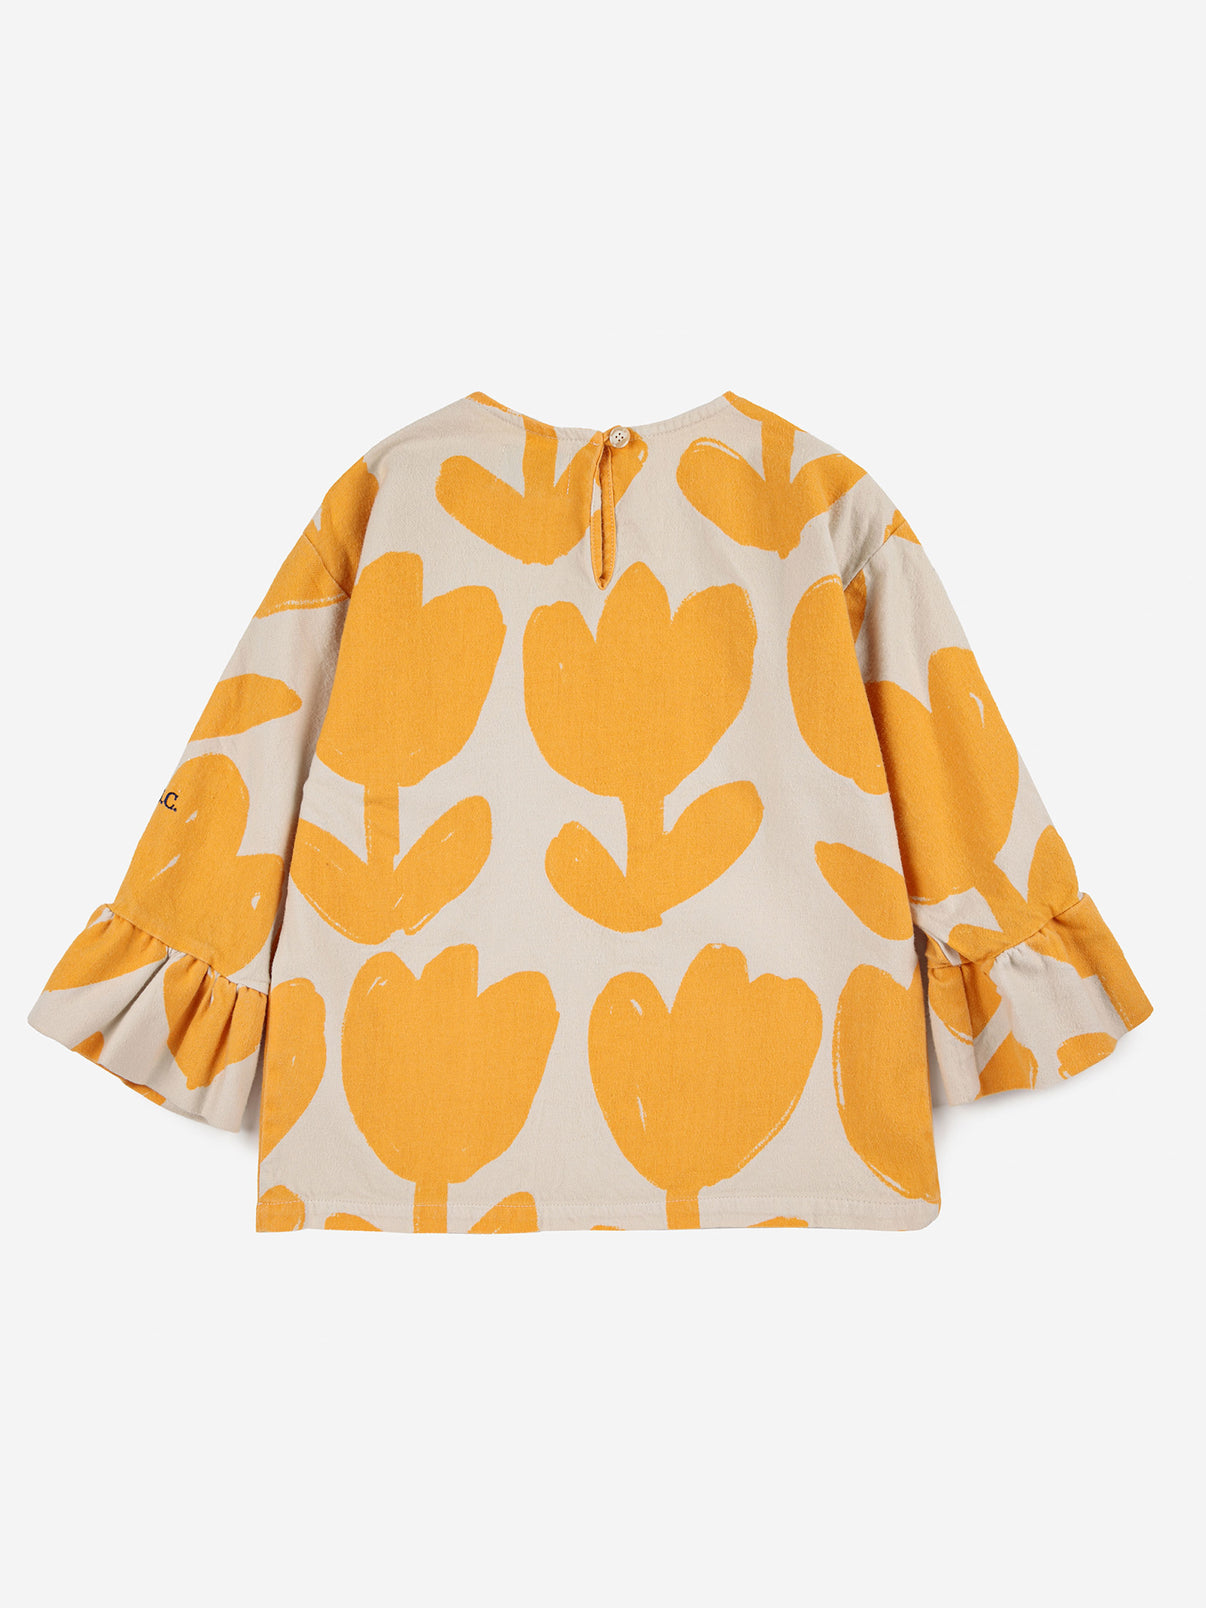 Bobo Choses Big Flower Ruffle Blouse. 100% cotton off white blouse with yellow flowers. Designed with long sleeves, back button fastening, embroidery, round neck and ruffled detailing. It has a evasé fit.  Sustainably and ethically made in Spain.